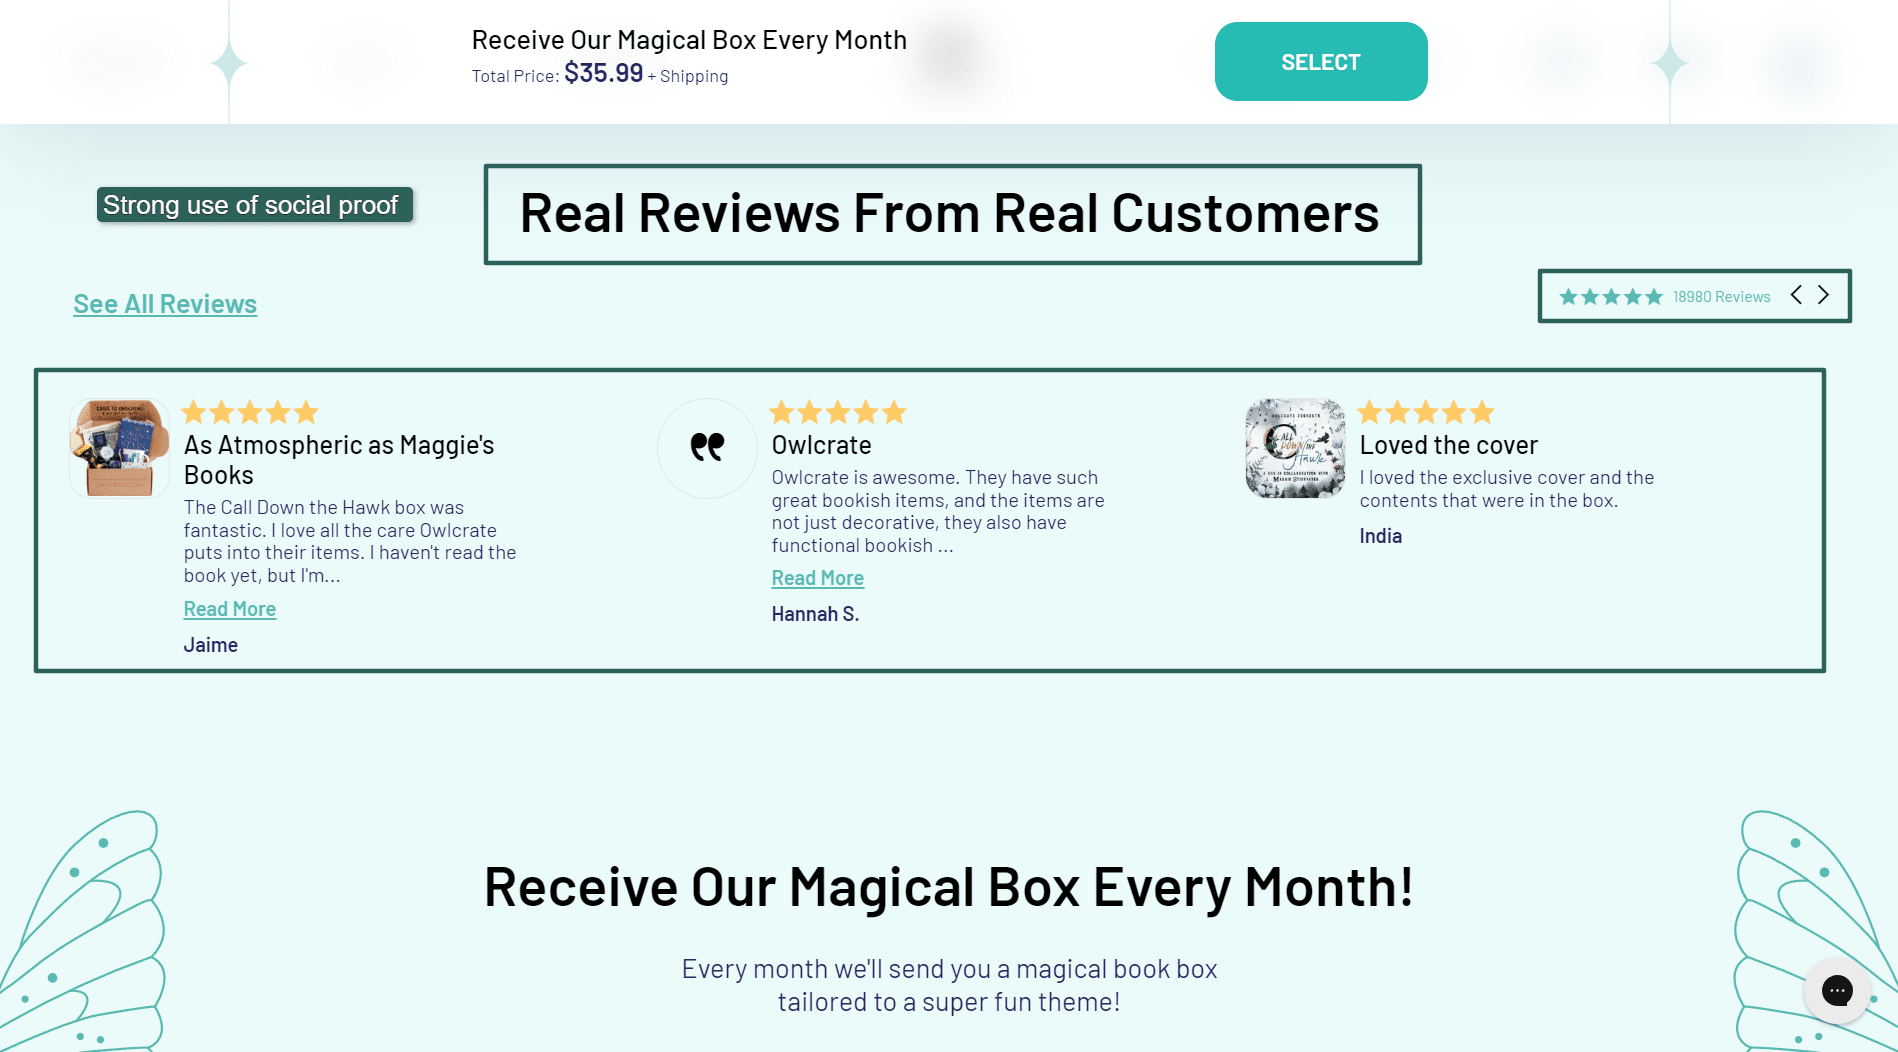 Over 18,000 reviews